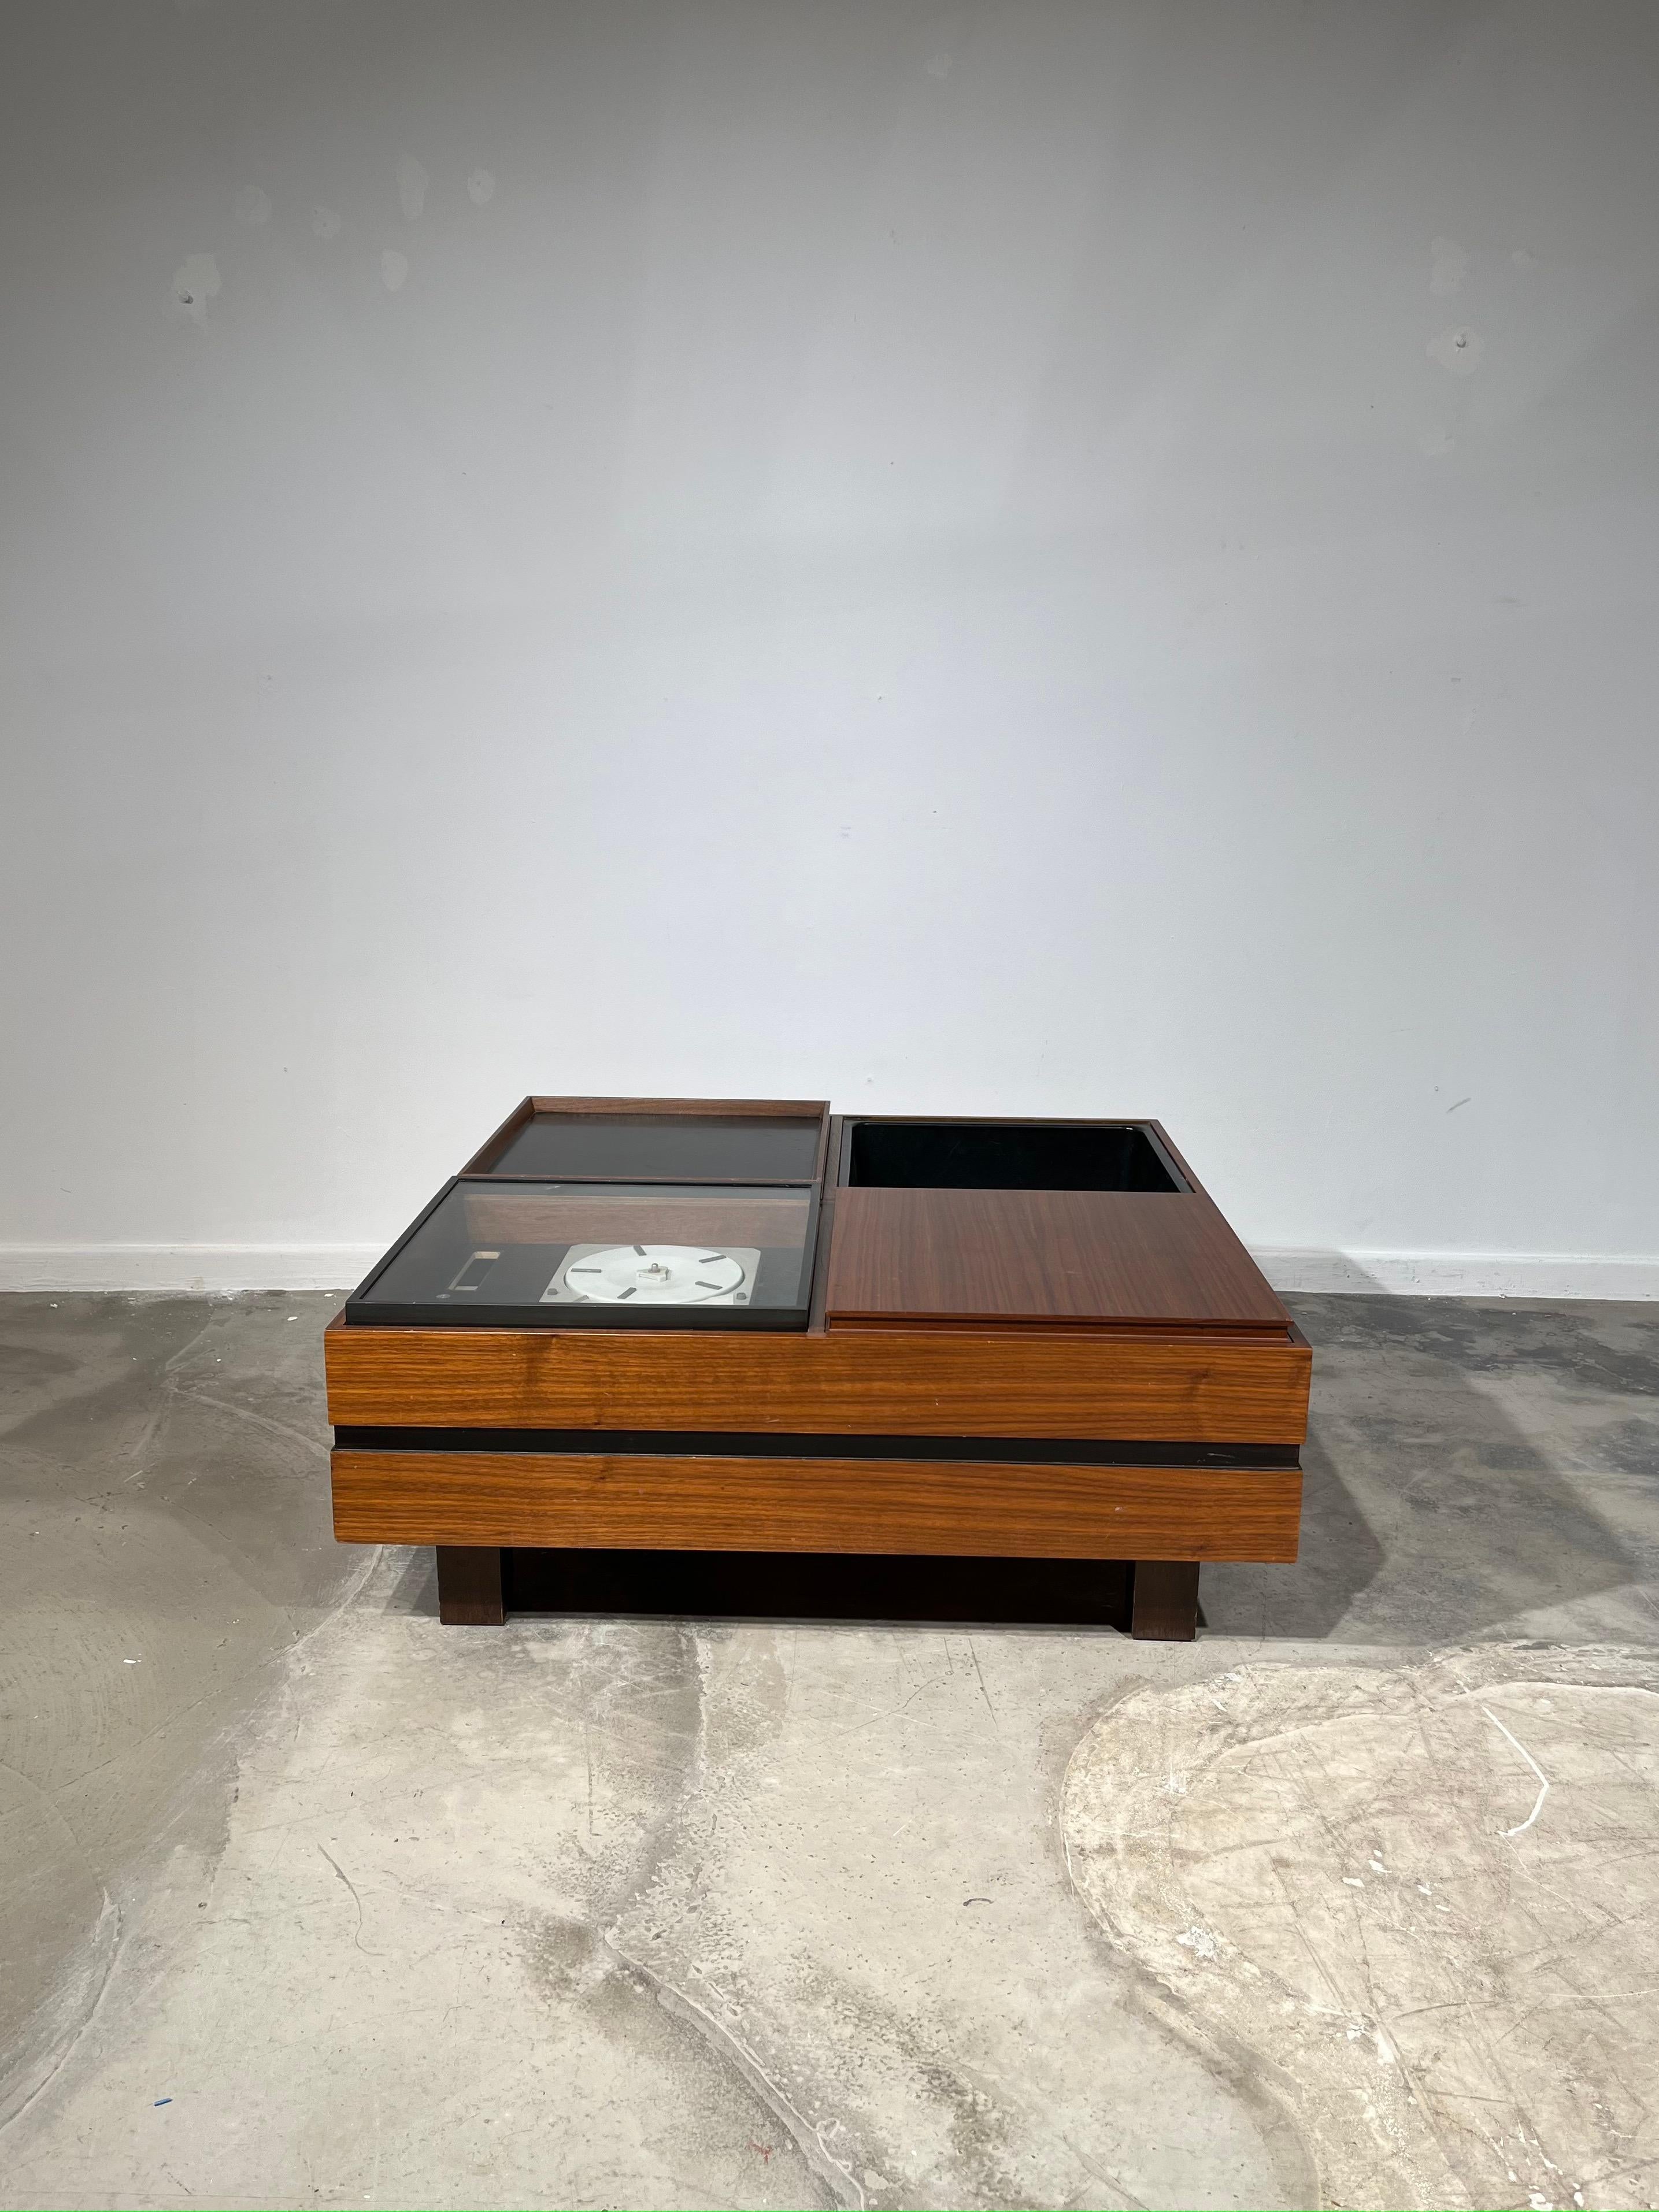 Iconic Carlo Hauner modular coffee table with 4 compartments. One has a plastic movable protection to add plants or to be used as a bar. One has a glass top (originally to show a disc player but not in function, so we choosed to move it away). The